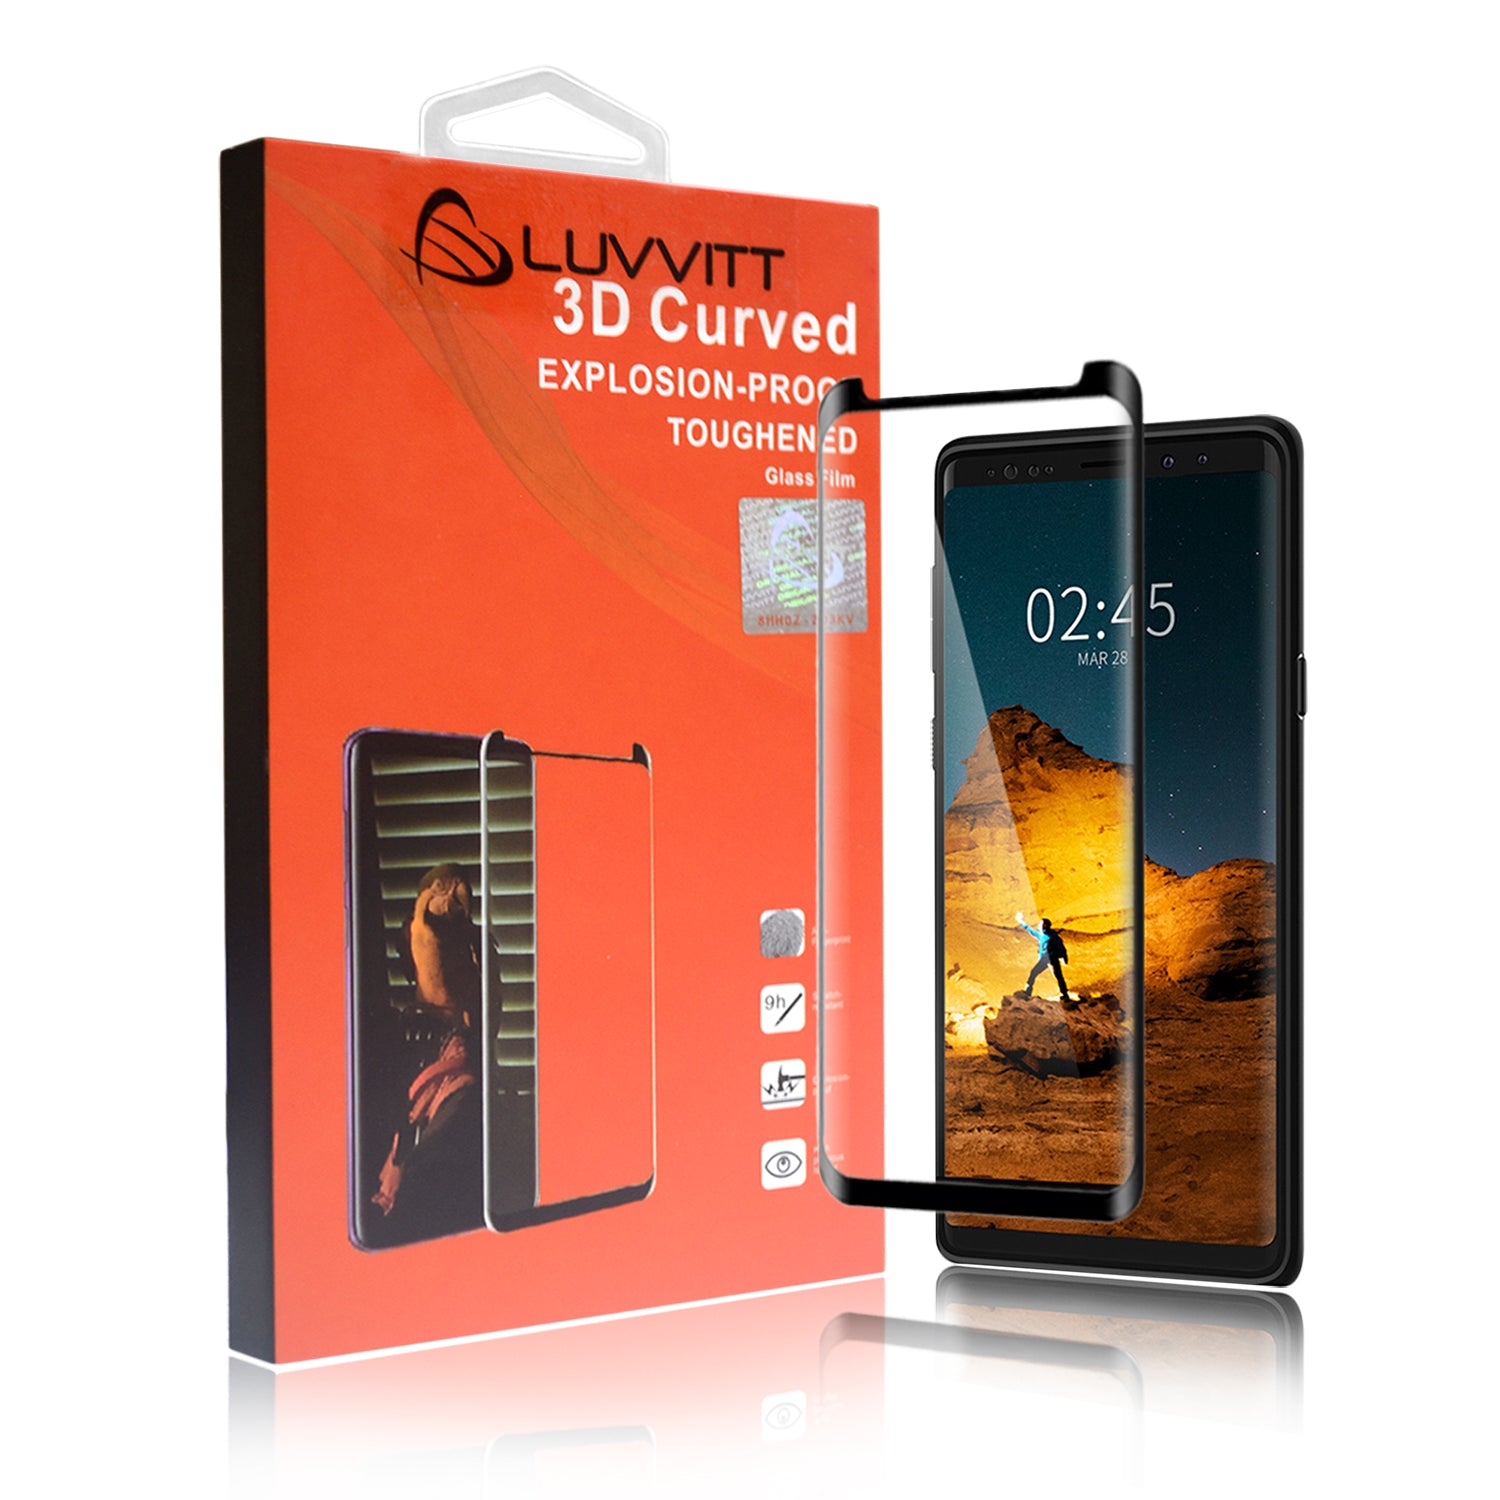 LUVVITT Tempered Glass Screen Protector Full Adhesive for Galaxy Note 9 - Black